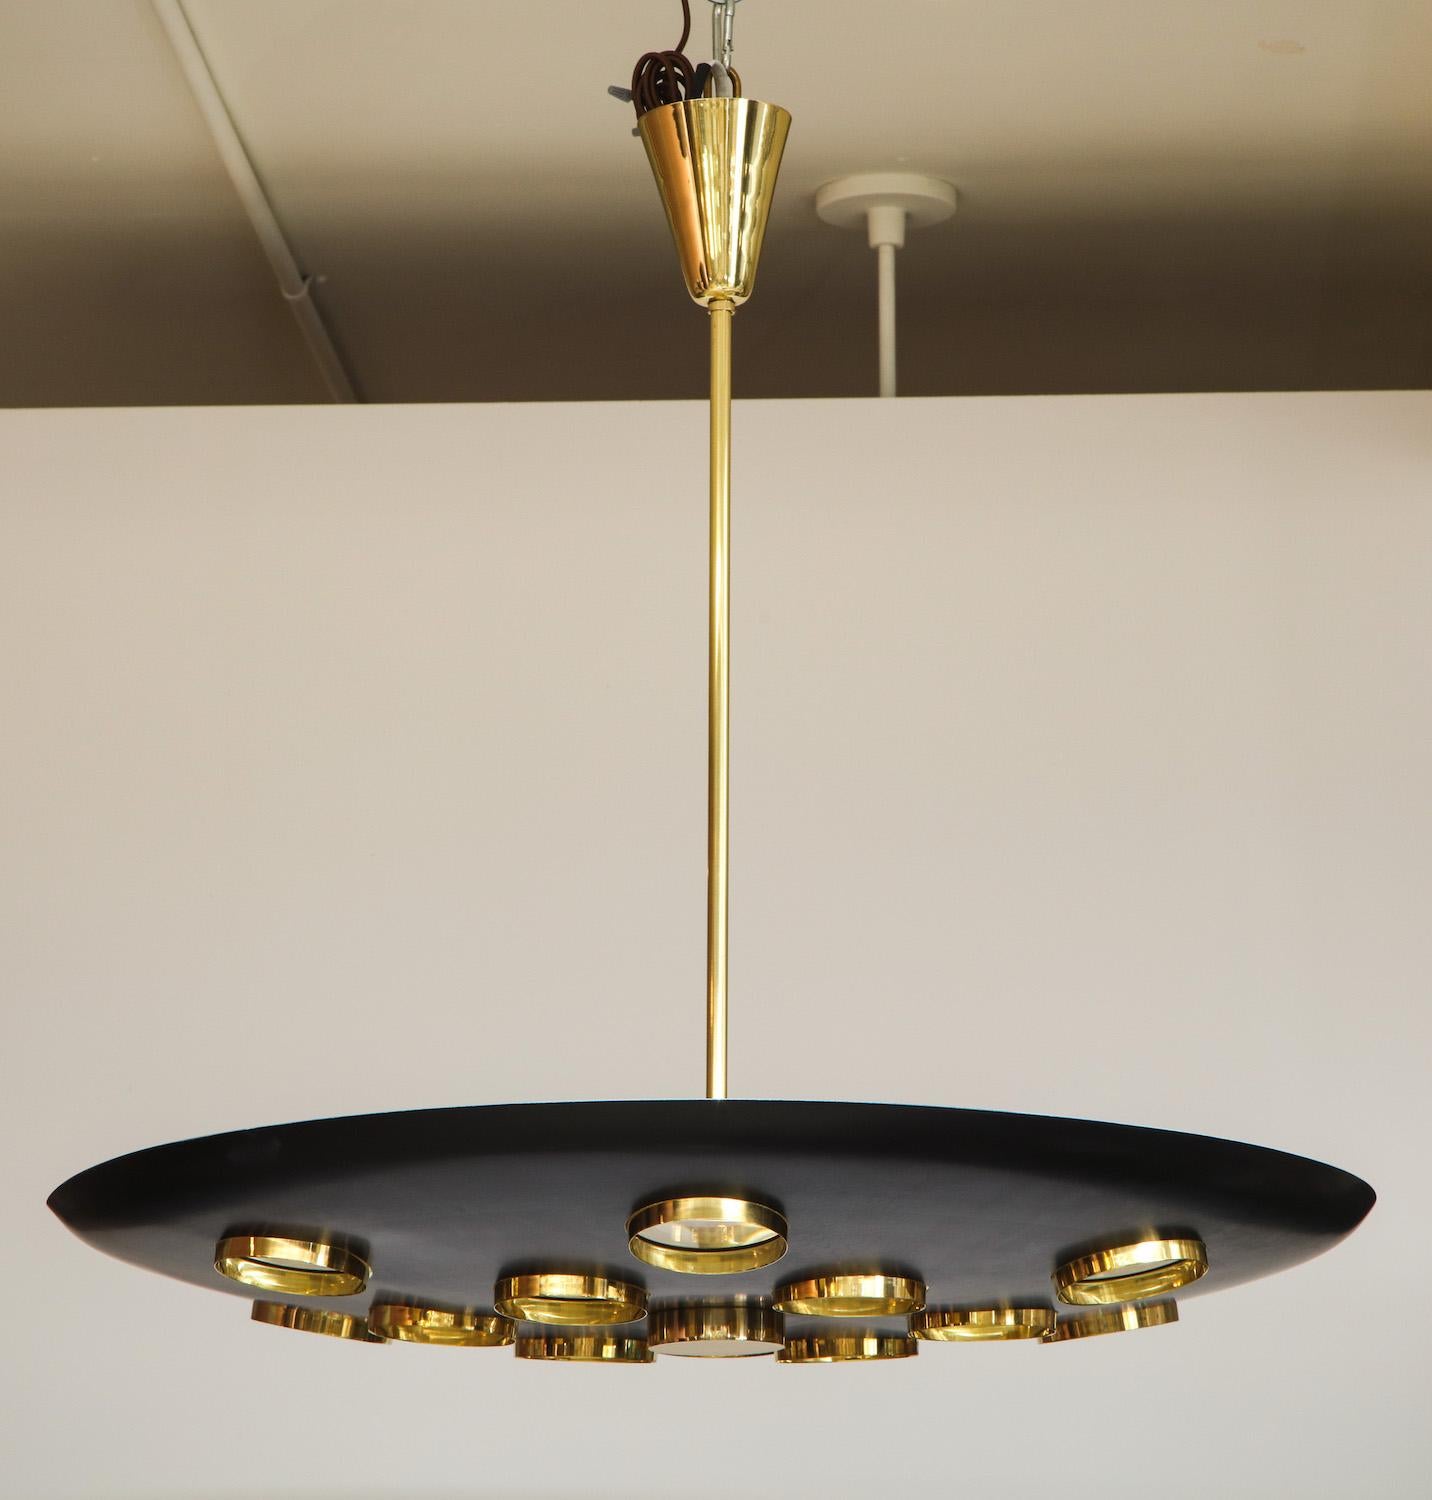 Black-painted aluminum saucer form, with circular cut-outs. Each cut-out is fitted with a brass framed glass lens, creating a subtle abstract effect. 6 standard E26 sockets and polished brass mounts. The rod can be cut down and this light can be